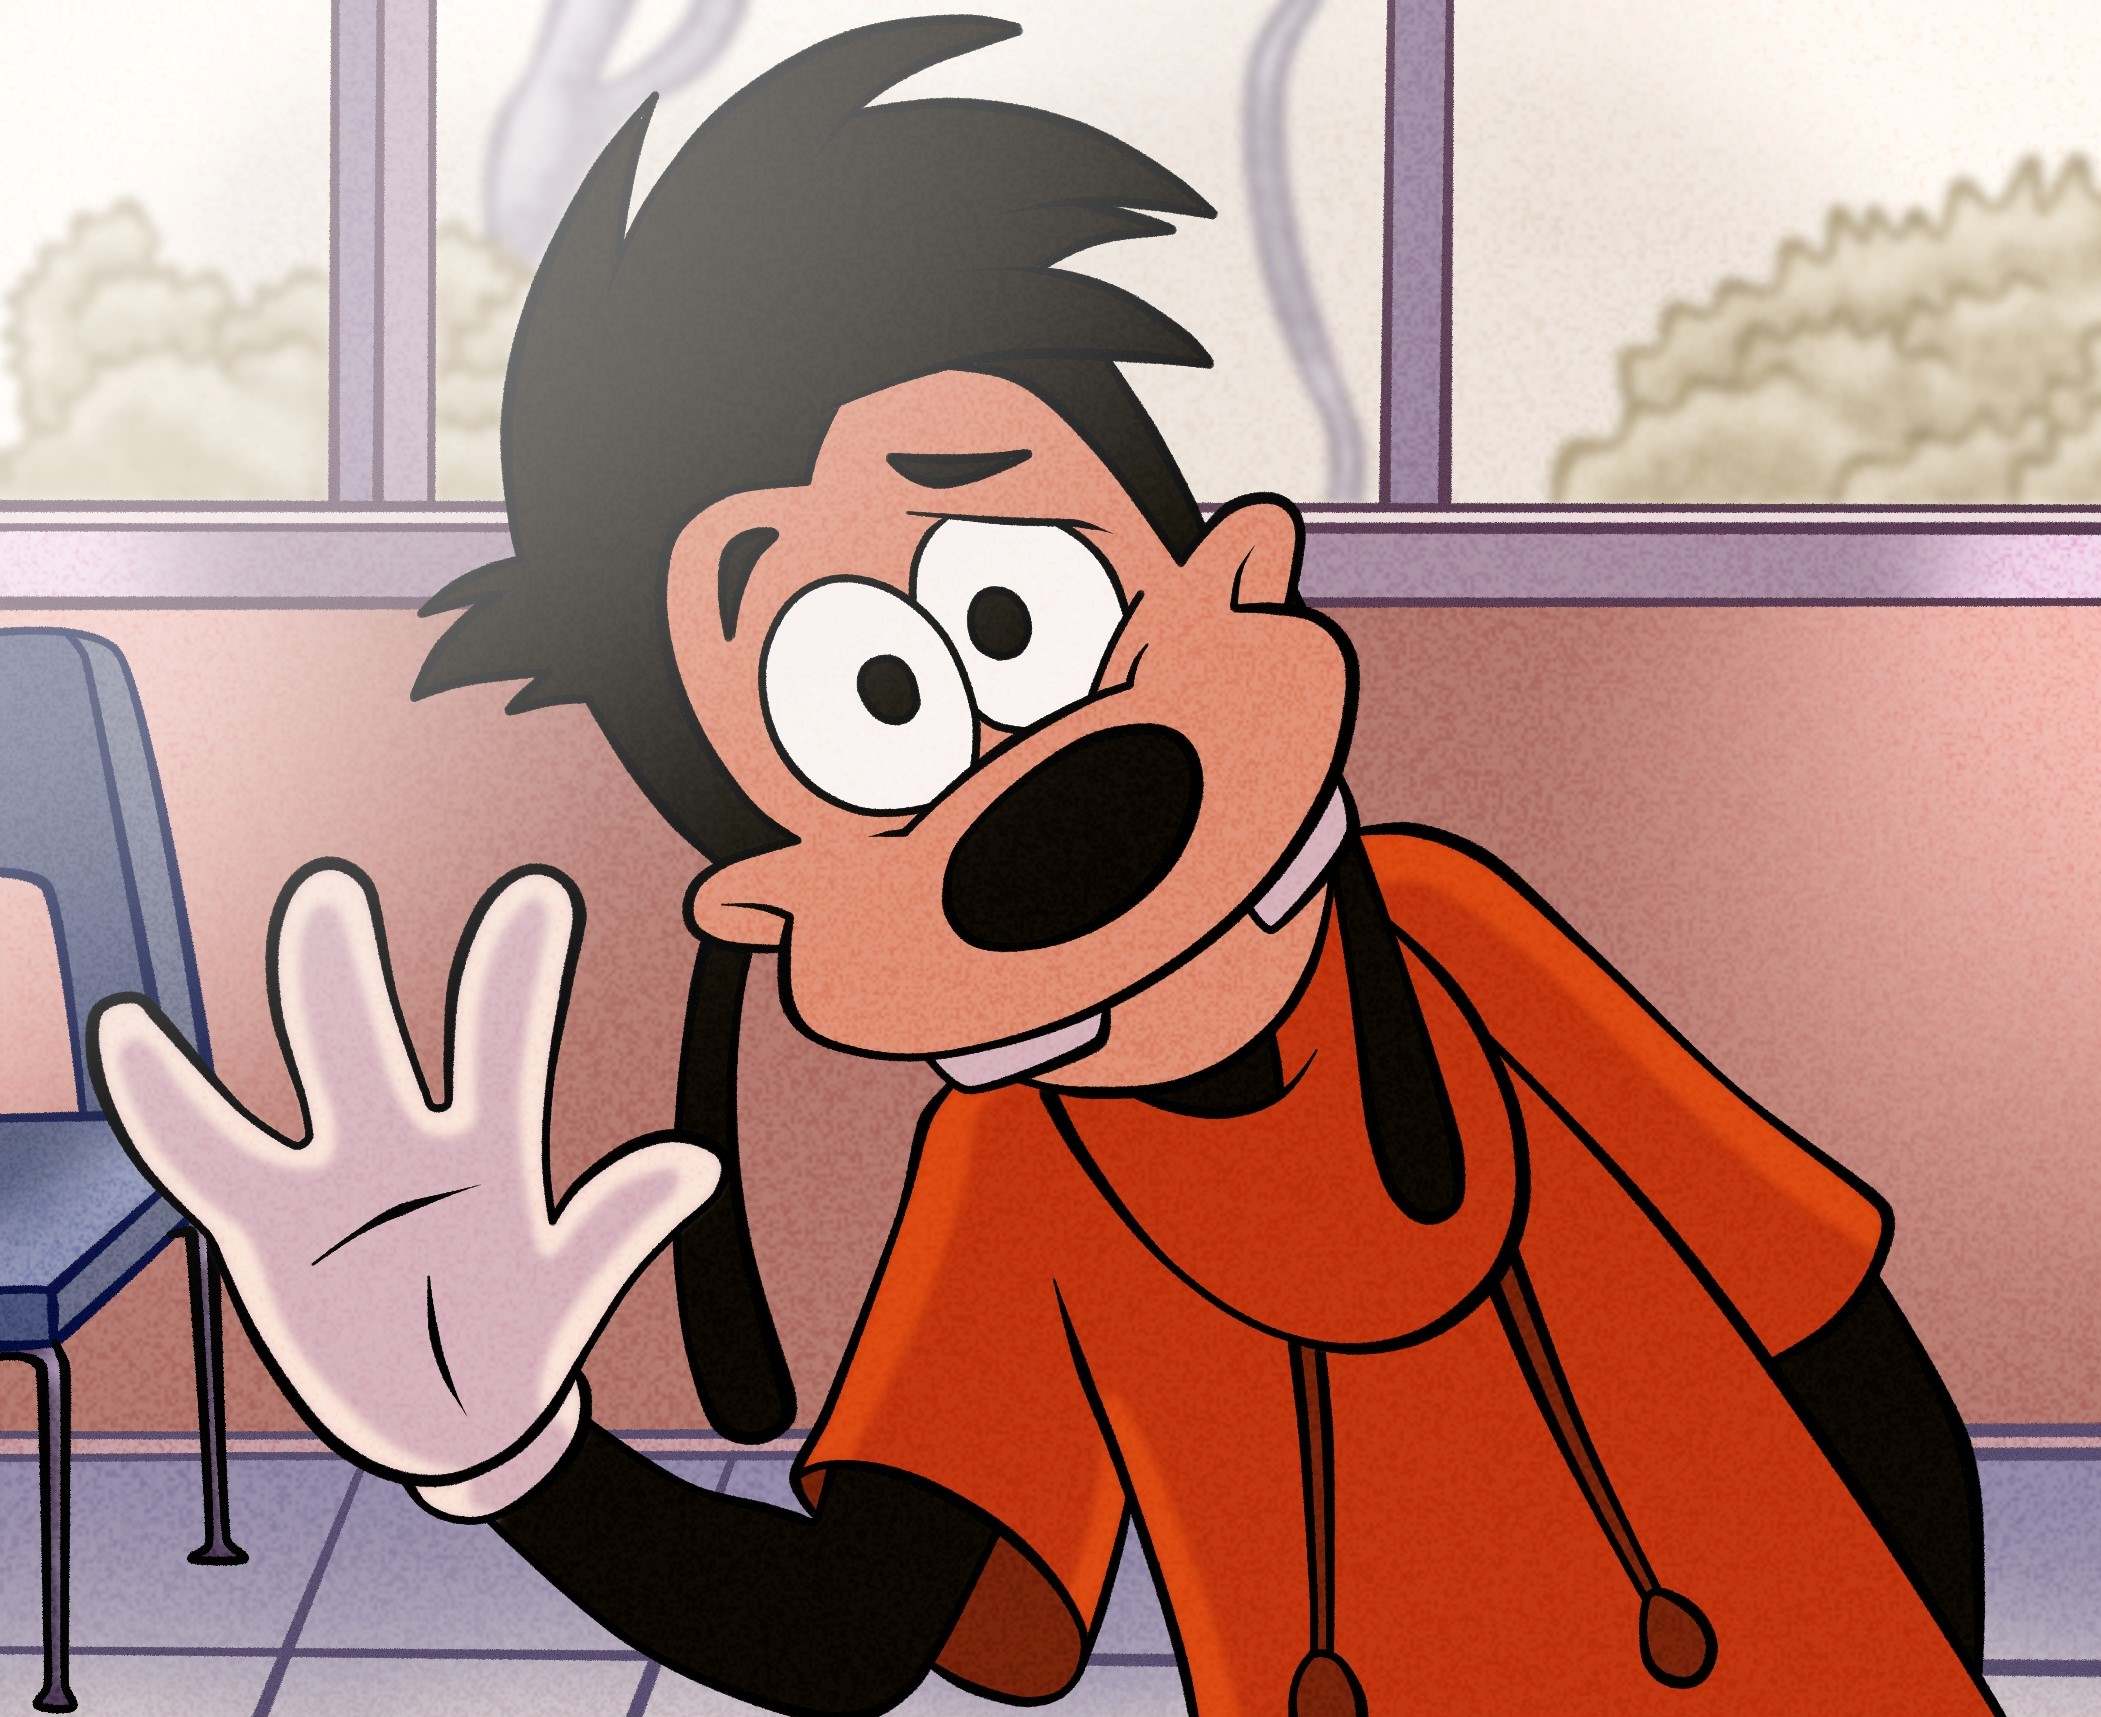 21 Facts About Max Goof (Disney) - Facts.net